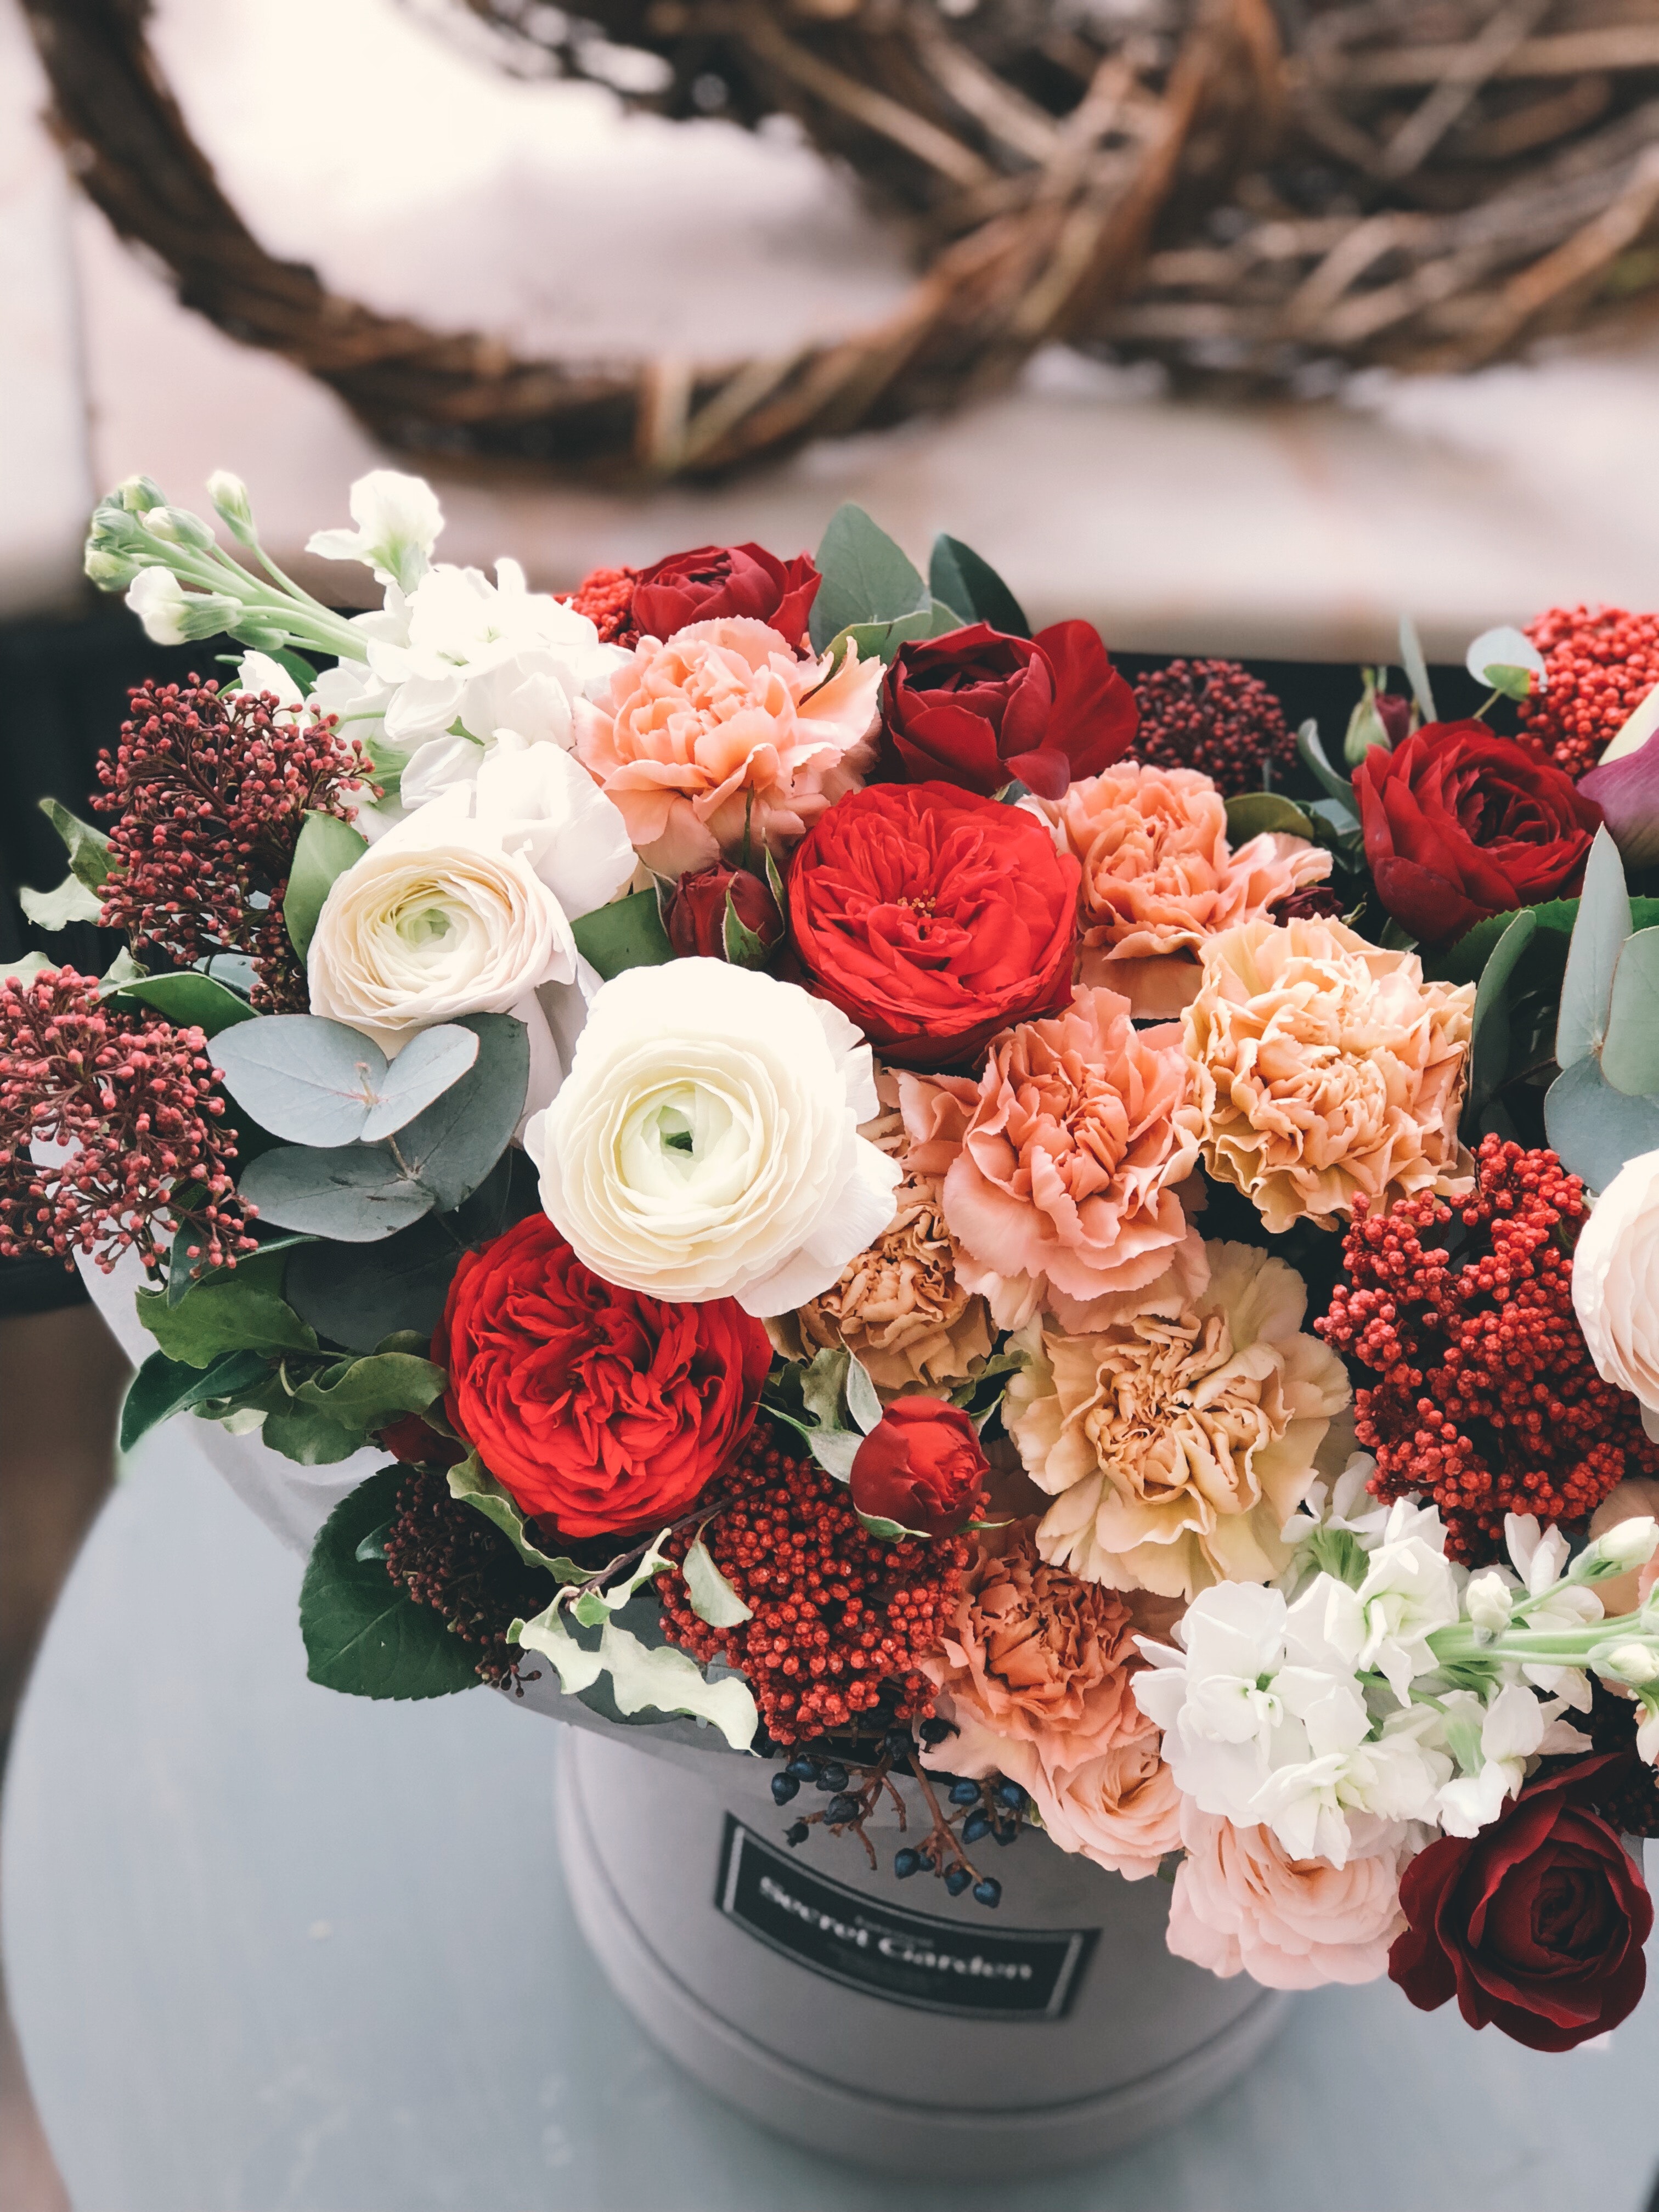 White, red, orange, and brown flowers photo